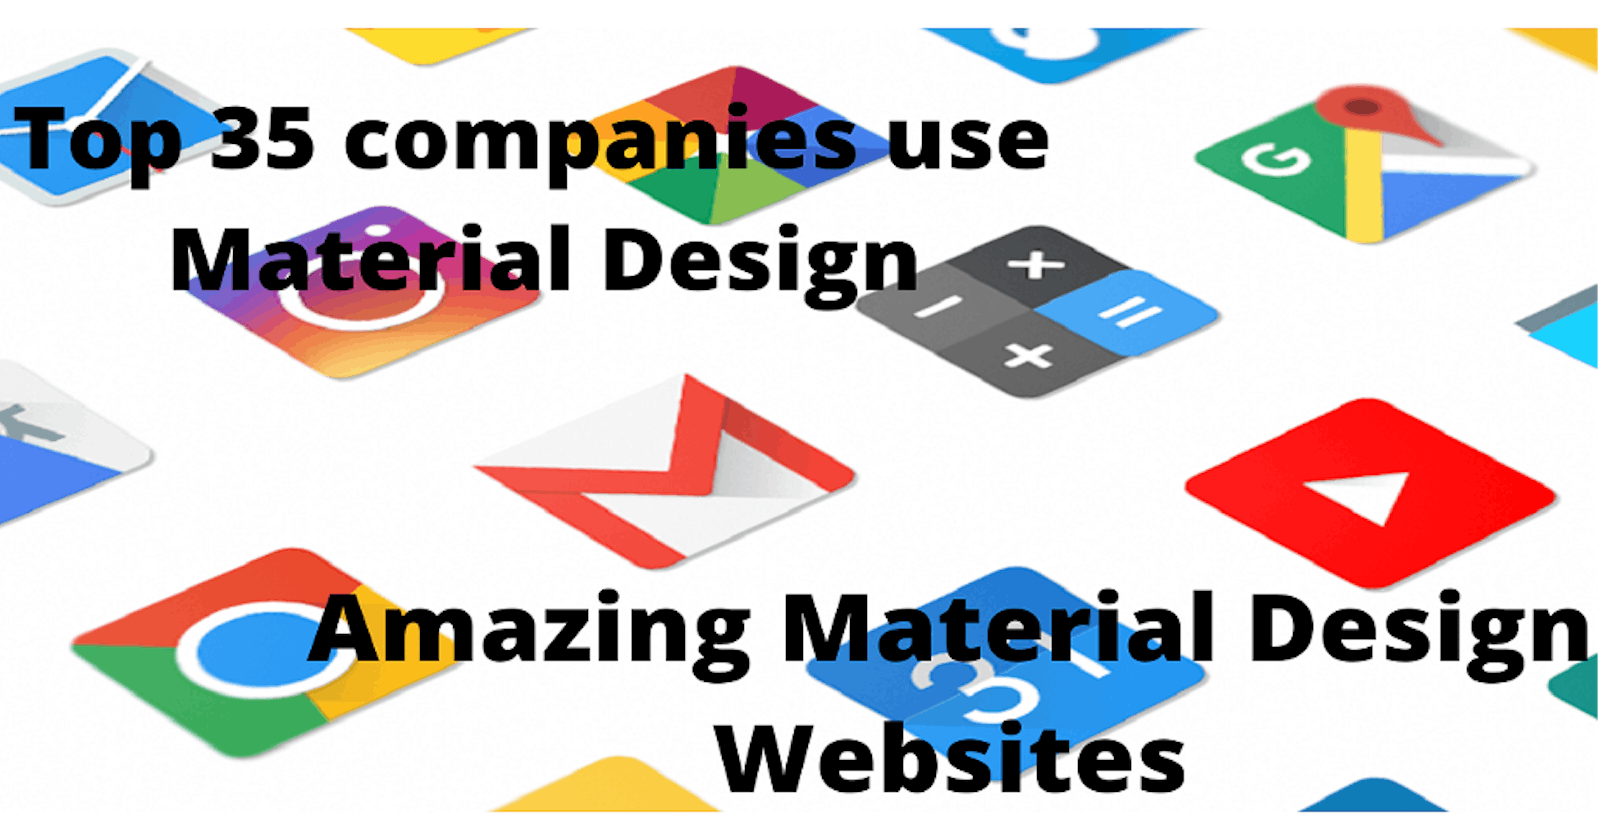 Who uses Material Design |Top 35 companies use Material Design